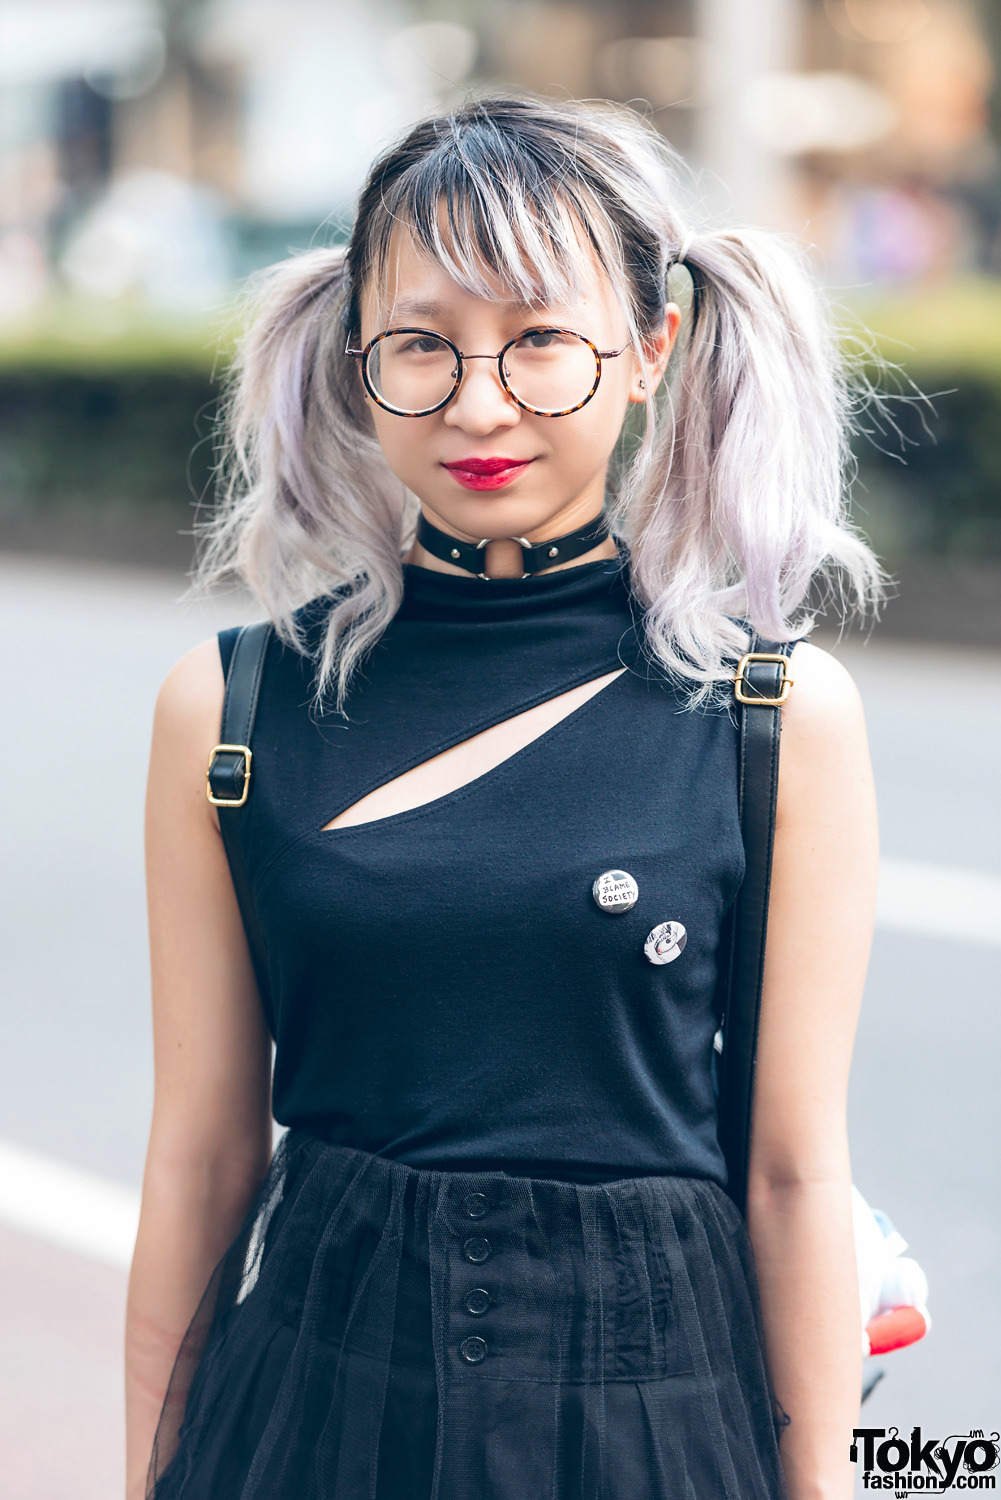 Illustrator Beverly Goh on the street in Harajuku wearing a goth look